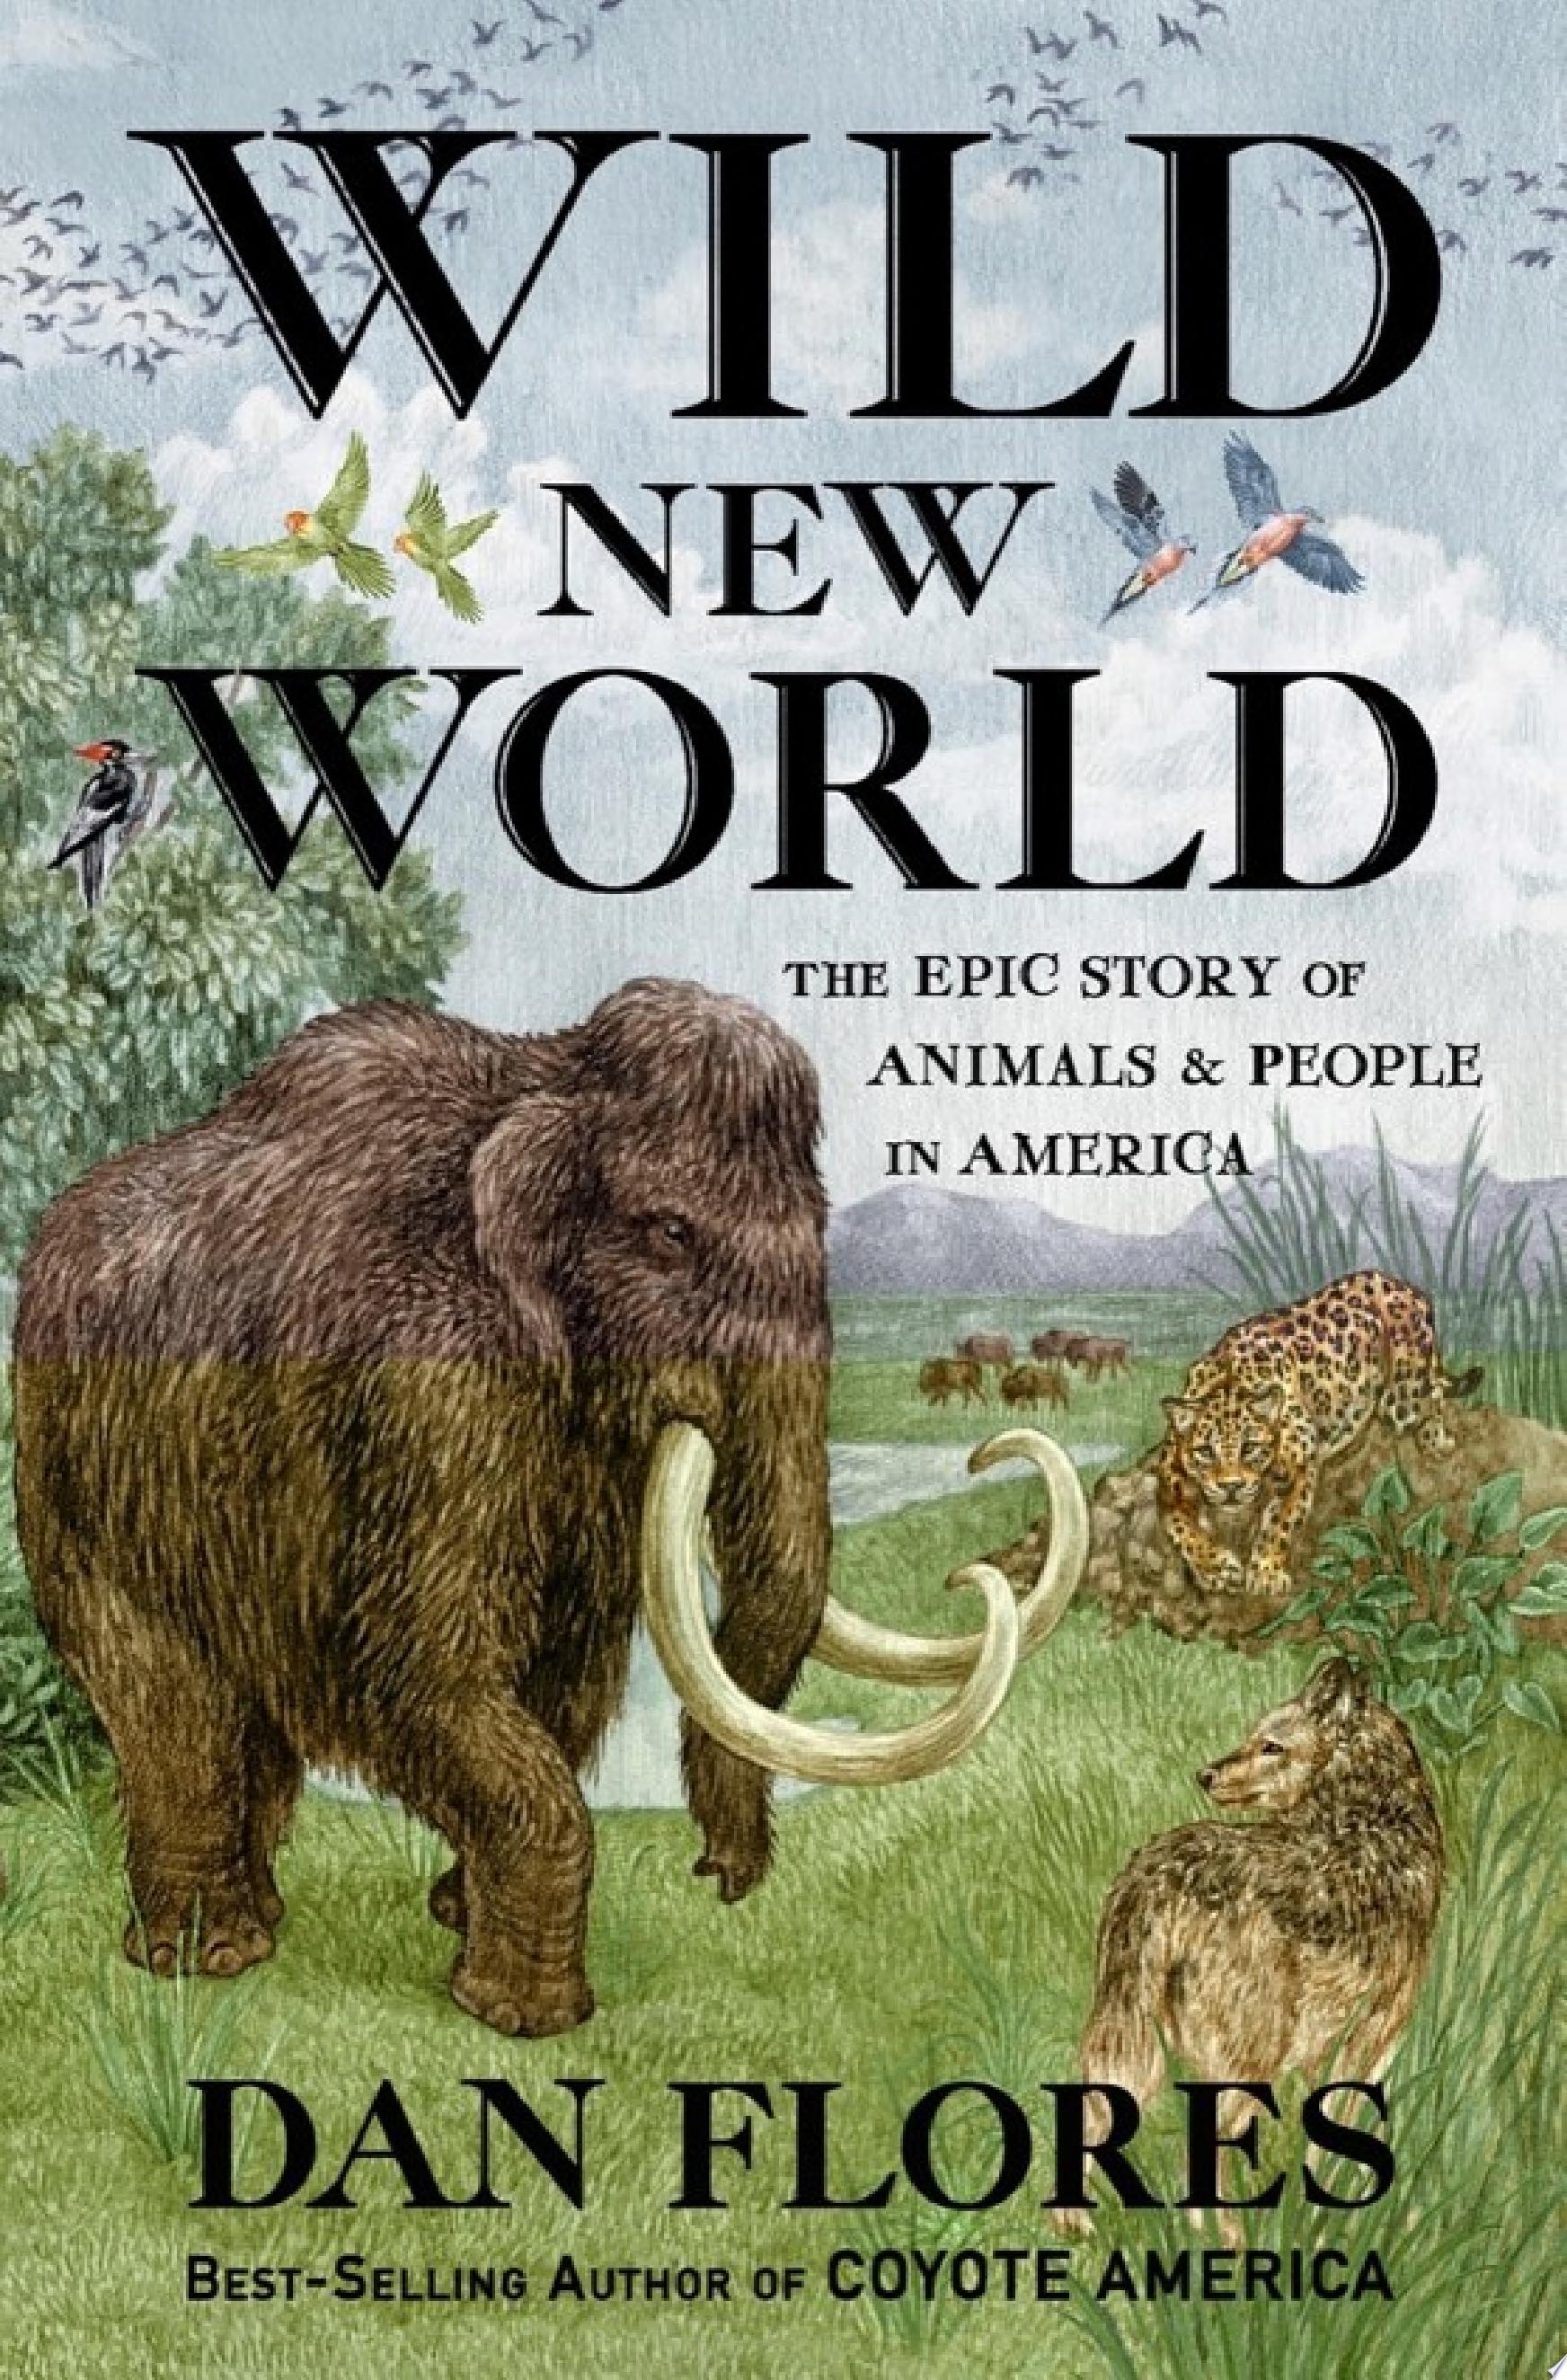 Image for "Wild New World: The Epic Story of Animals and People in America"